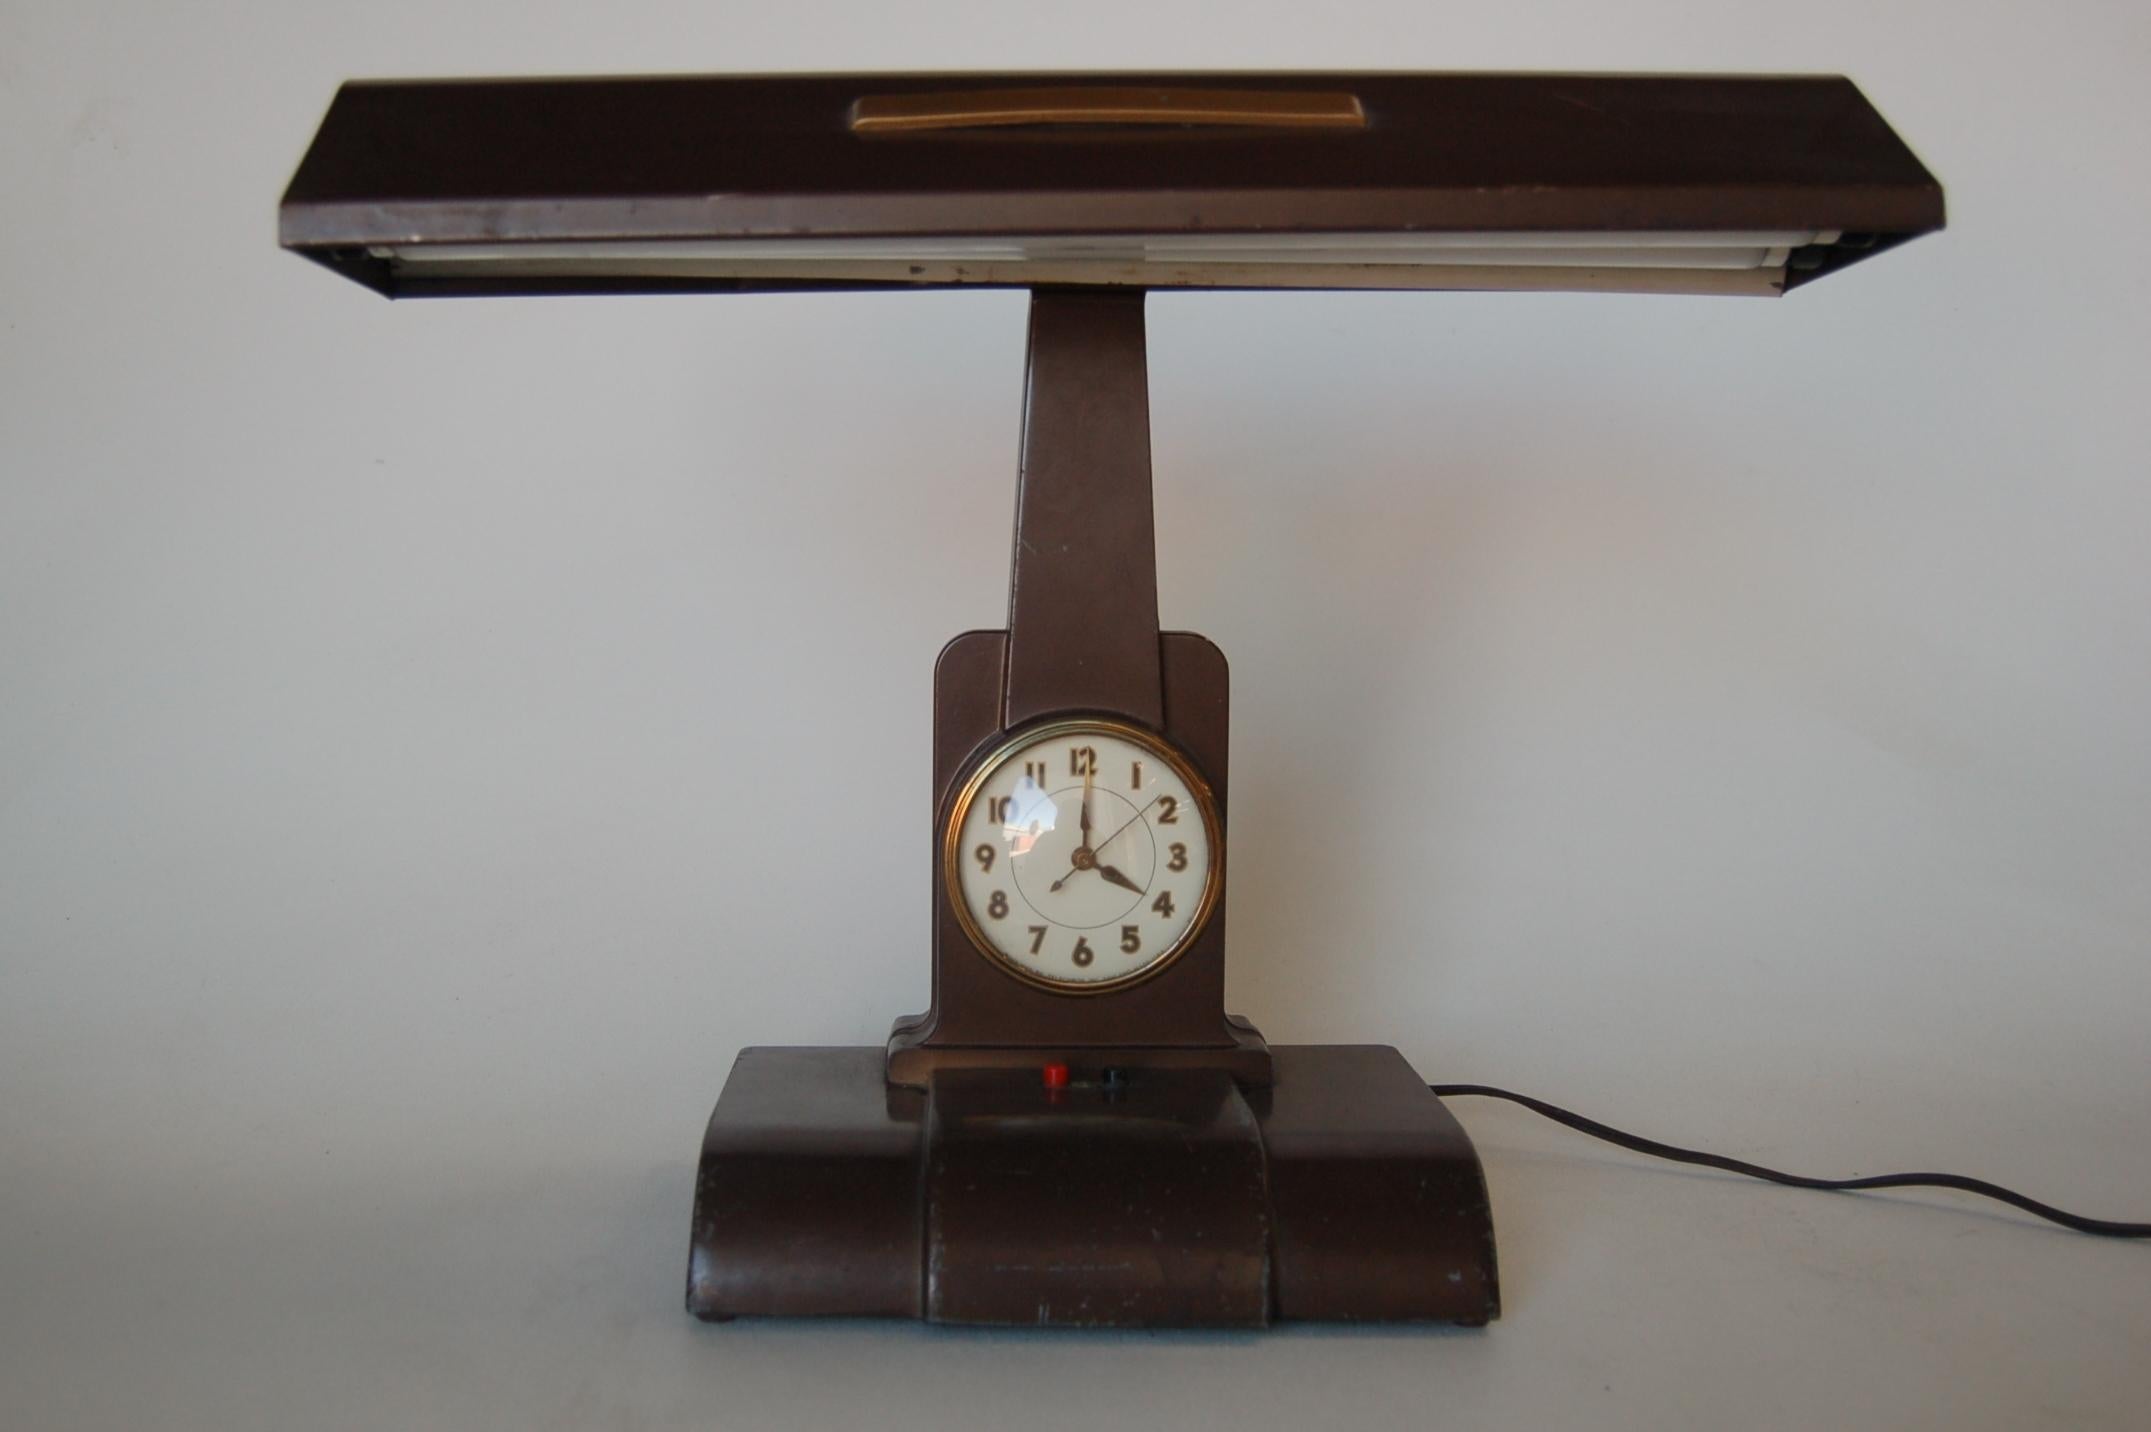 Authentic Art Deco brown hooded fluorescent desk lamp with the clock. The face of the clock reads 